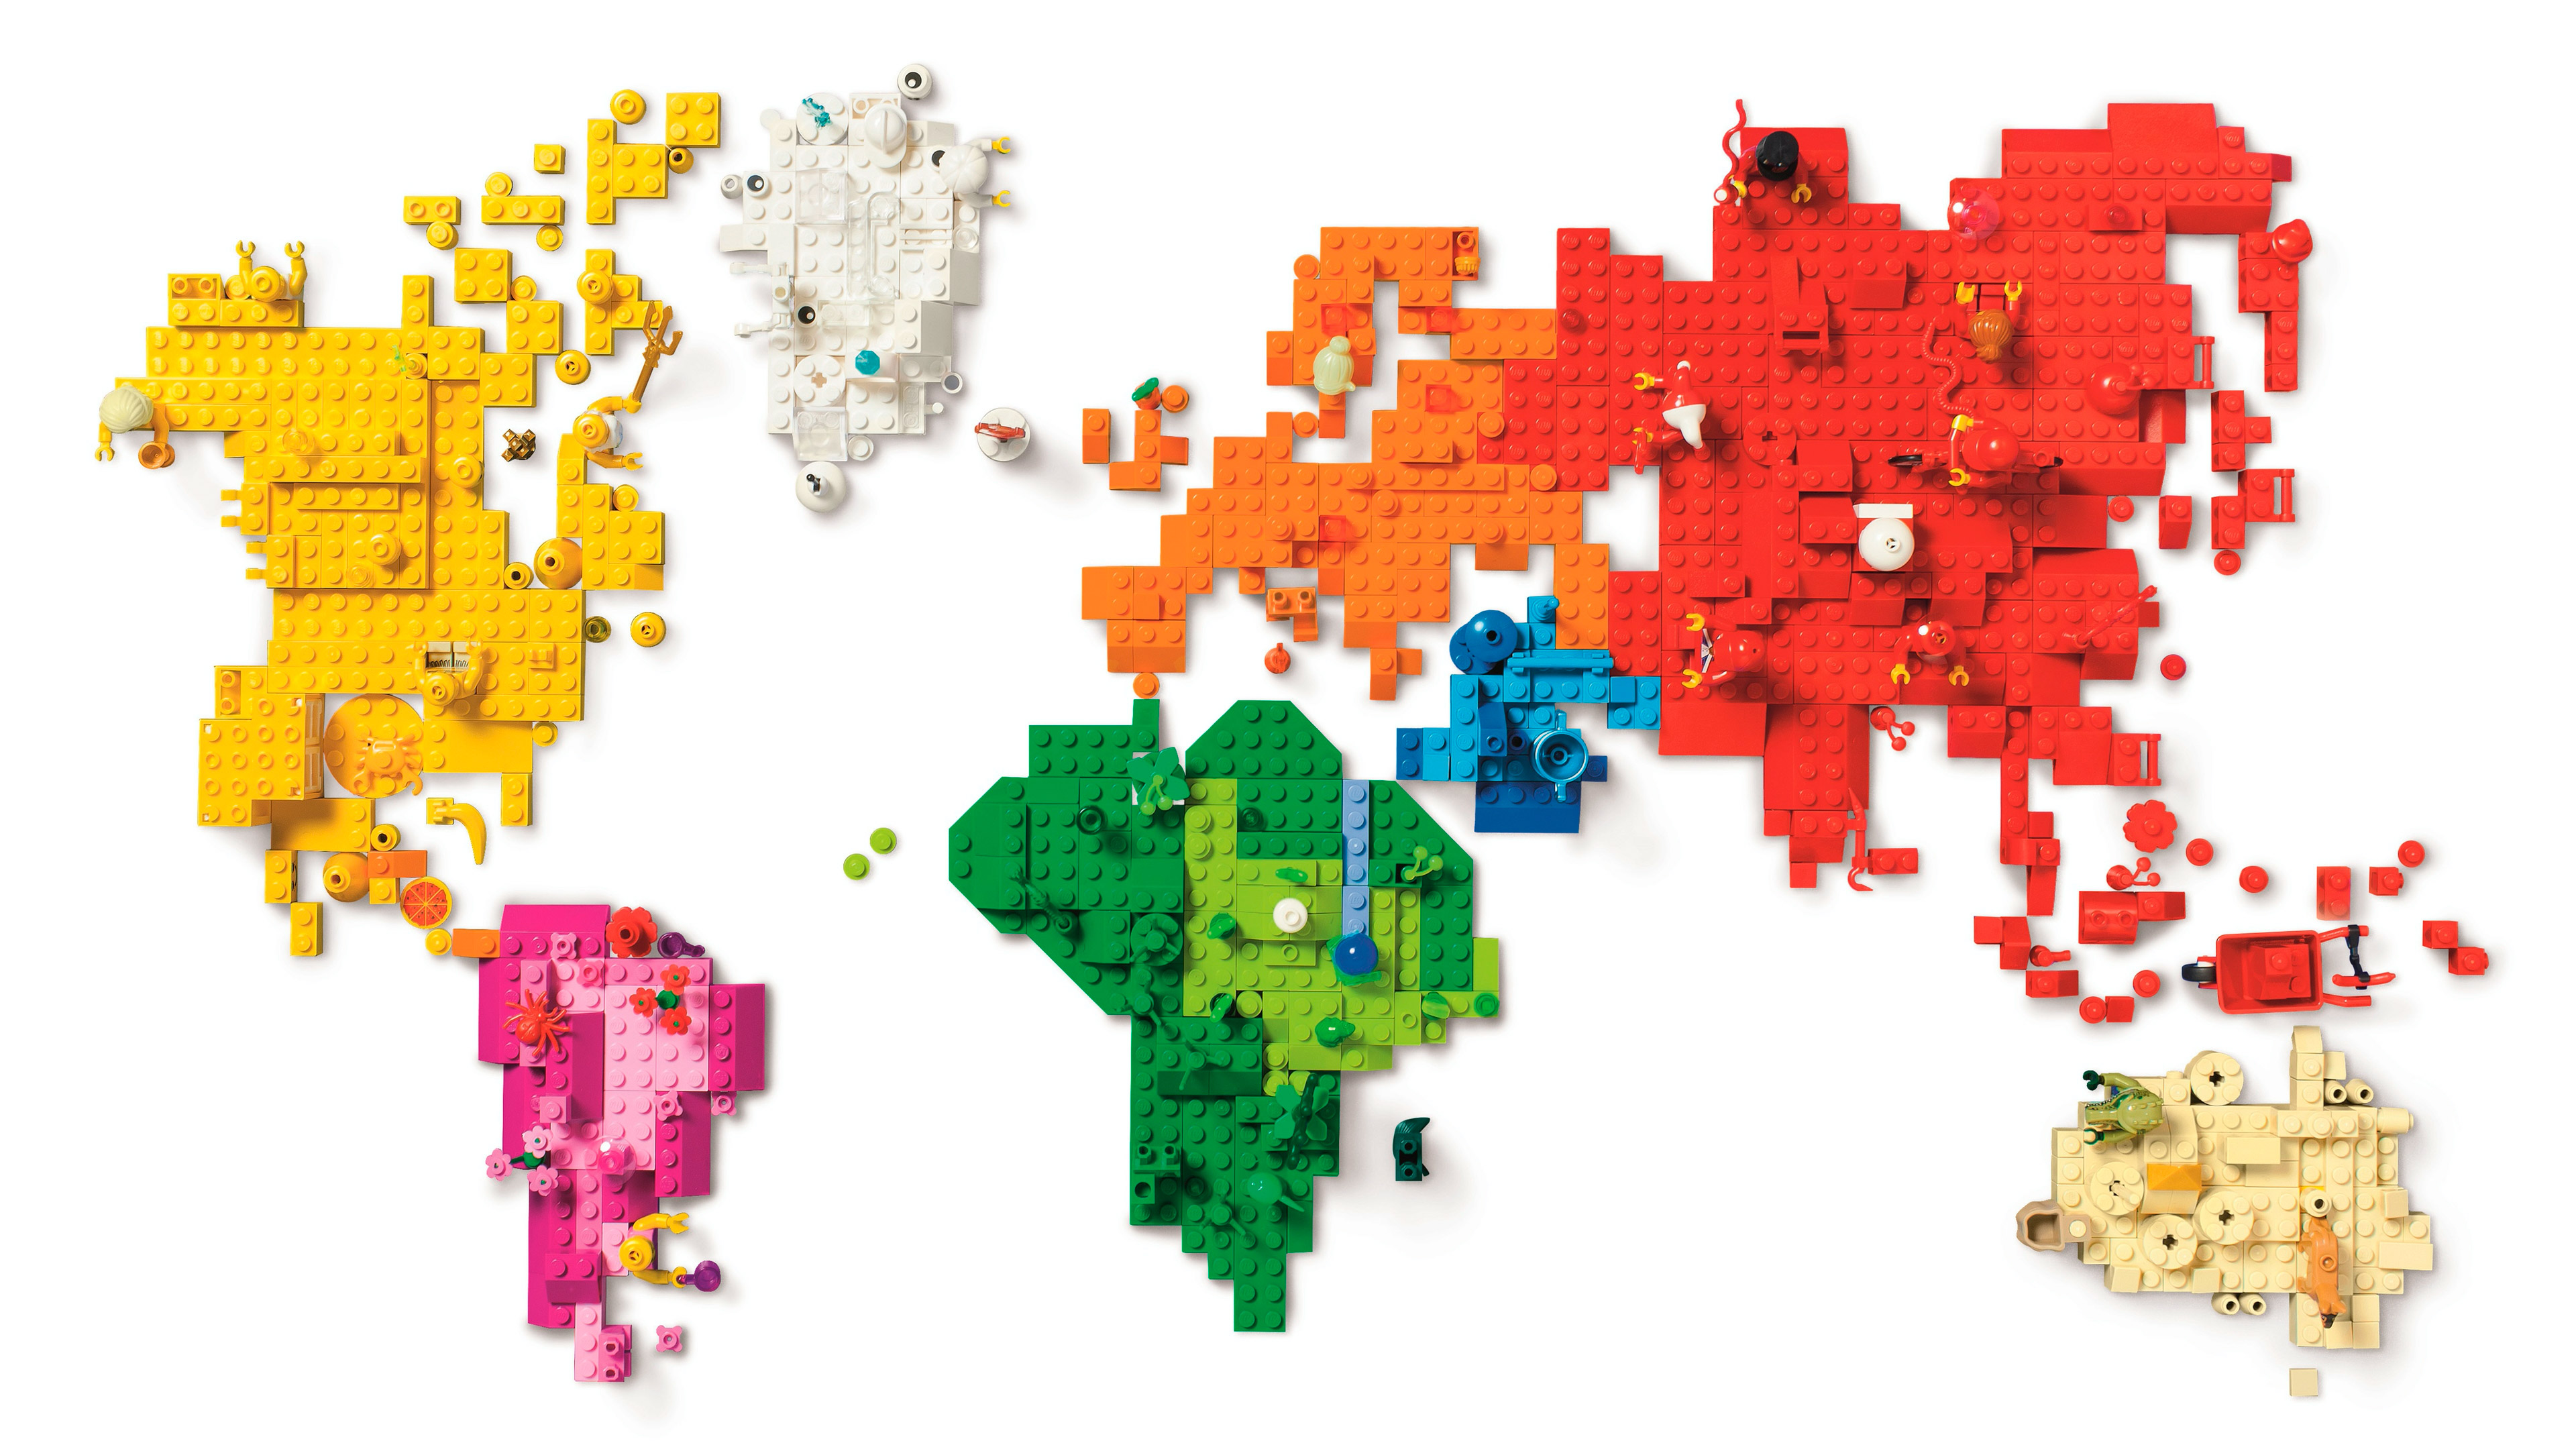 lego sales by country